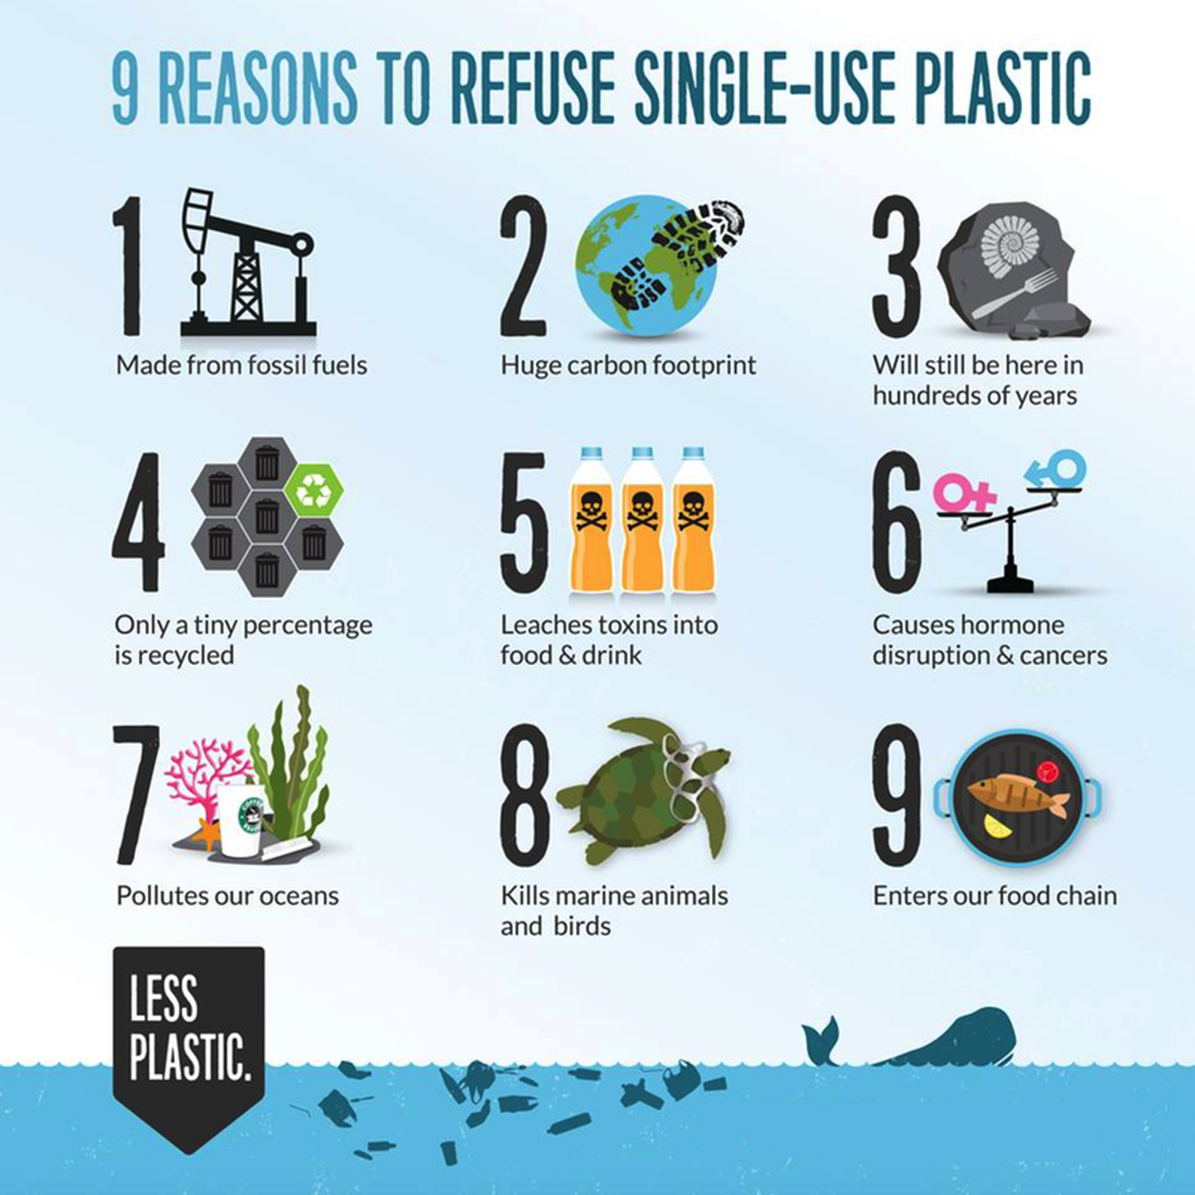 how to reduce plastic usage